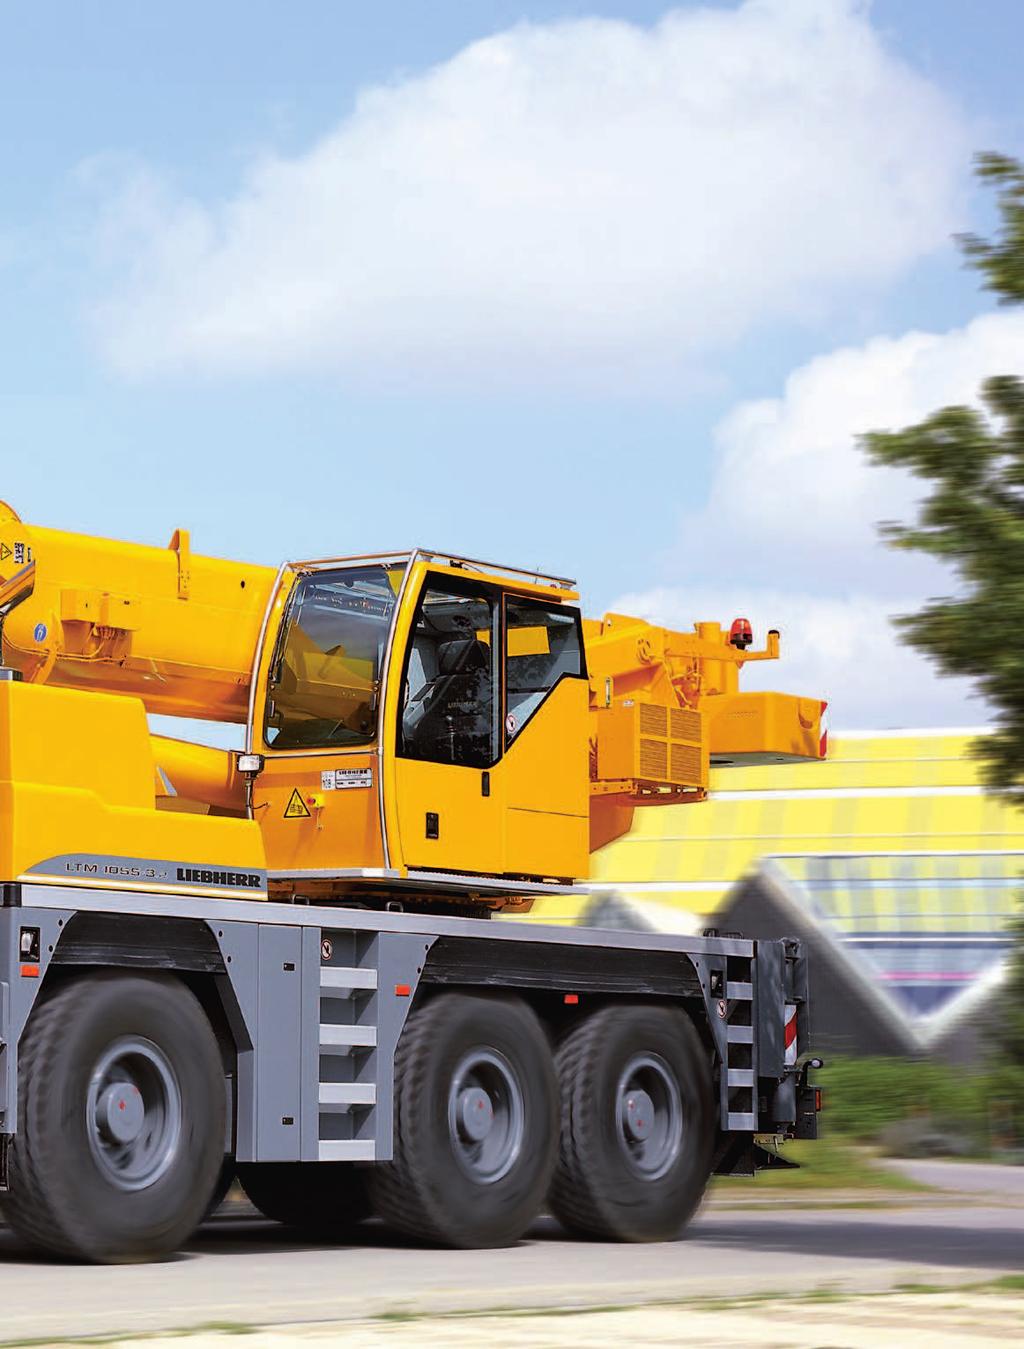 A long telescopic boom, high capacities, an extraordinary mobility as well as a comprehensive comfort and safety configuration distinguish the mobile crane from Liebherr.